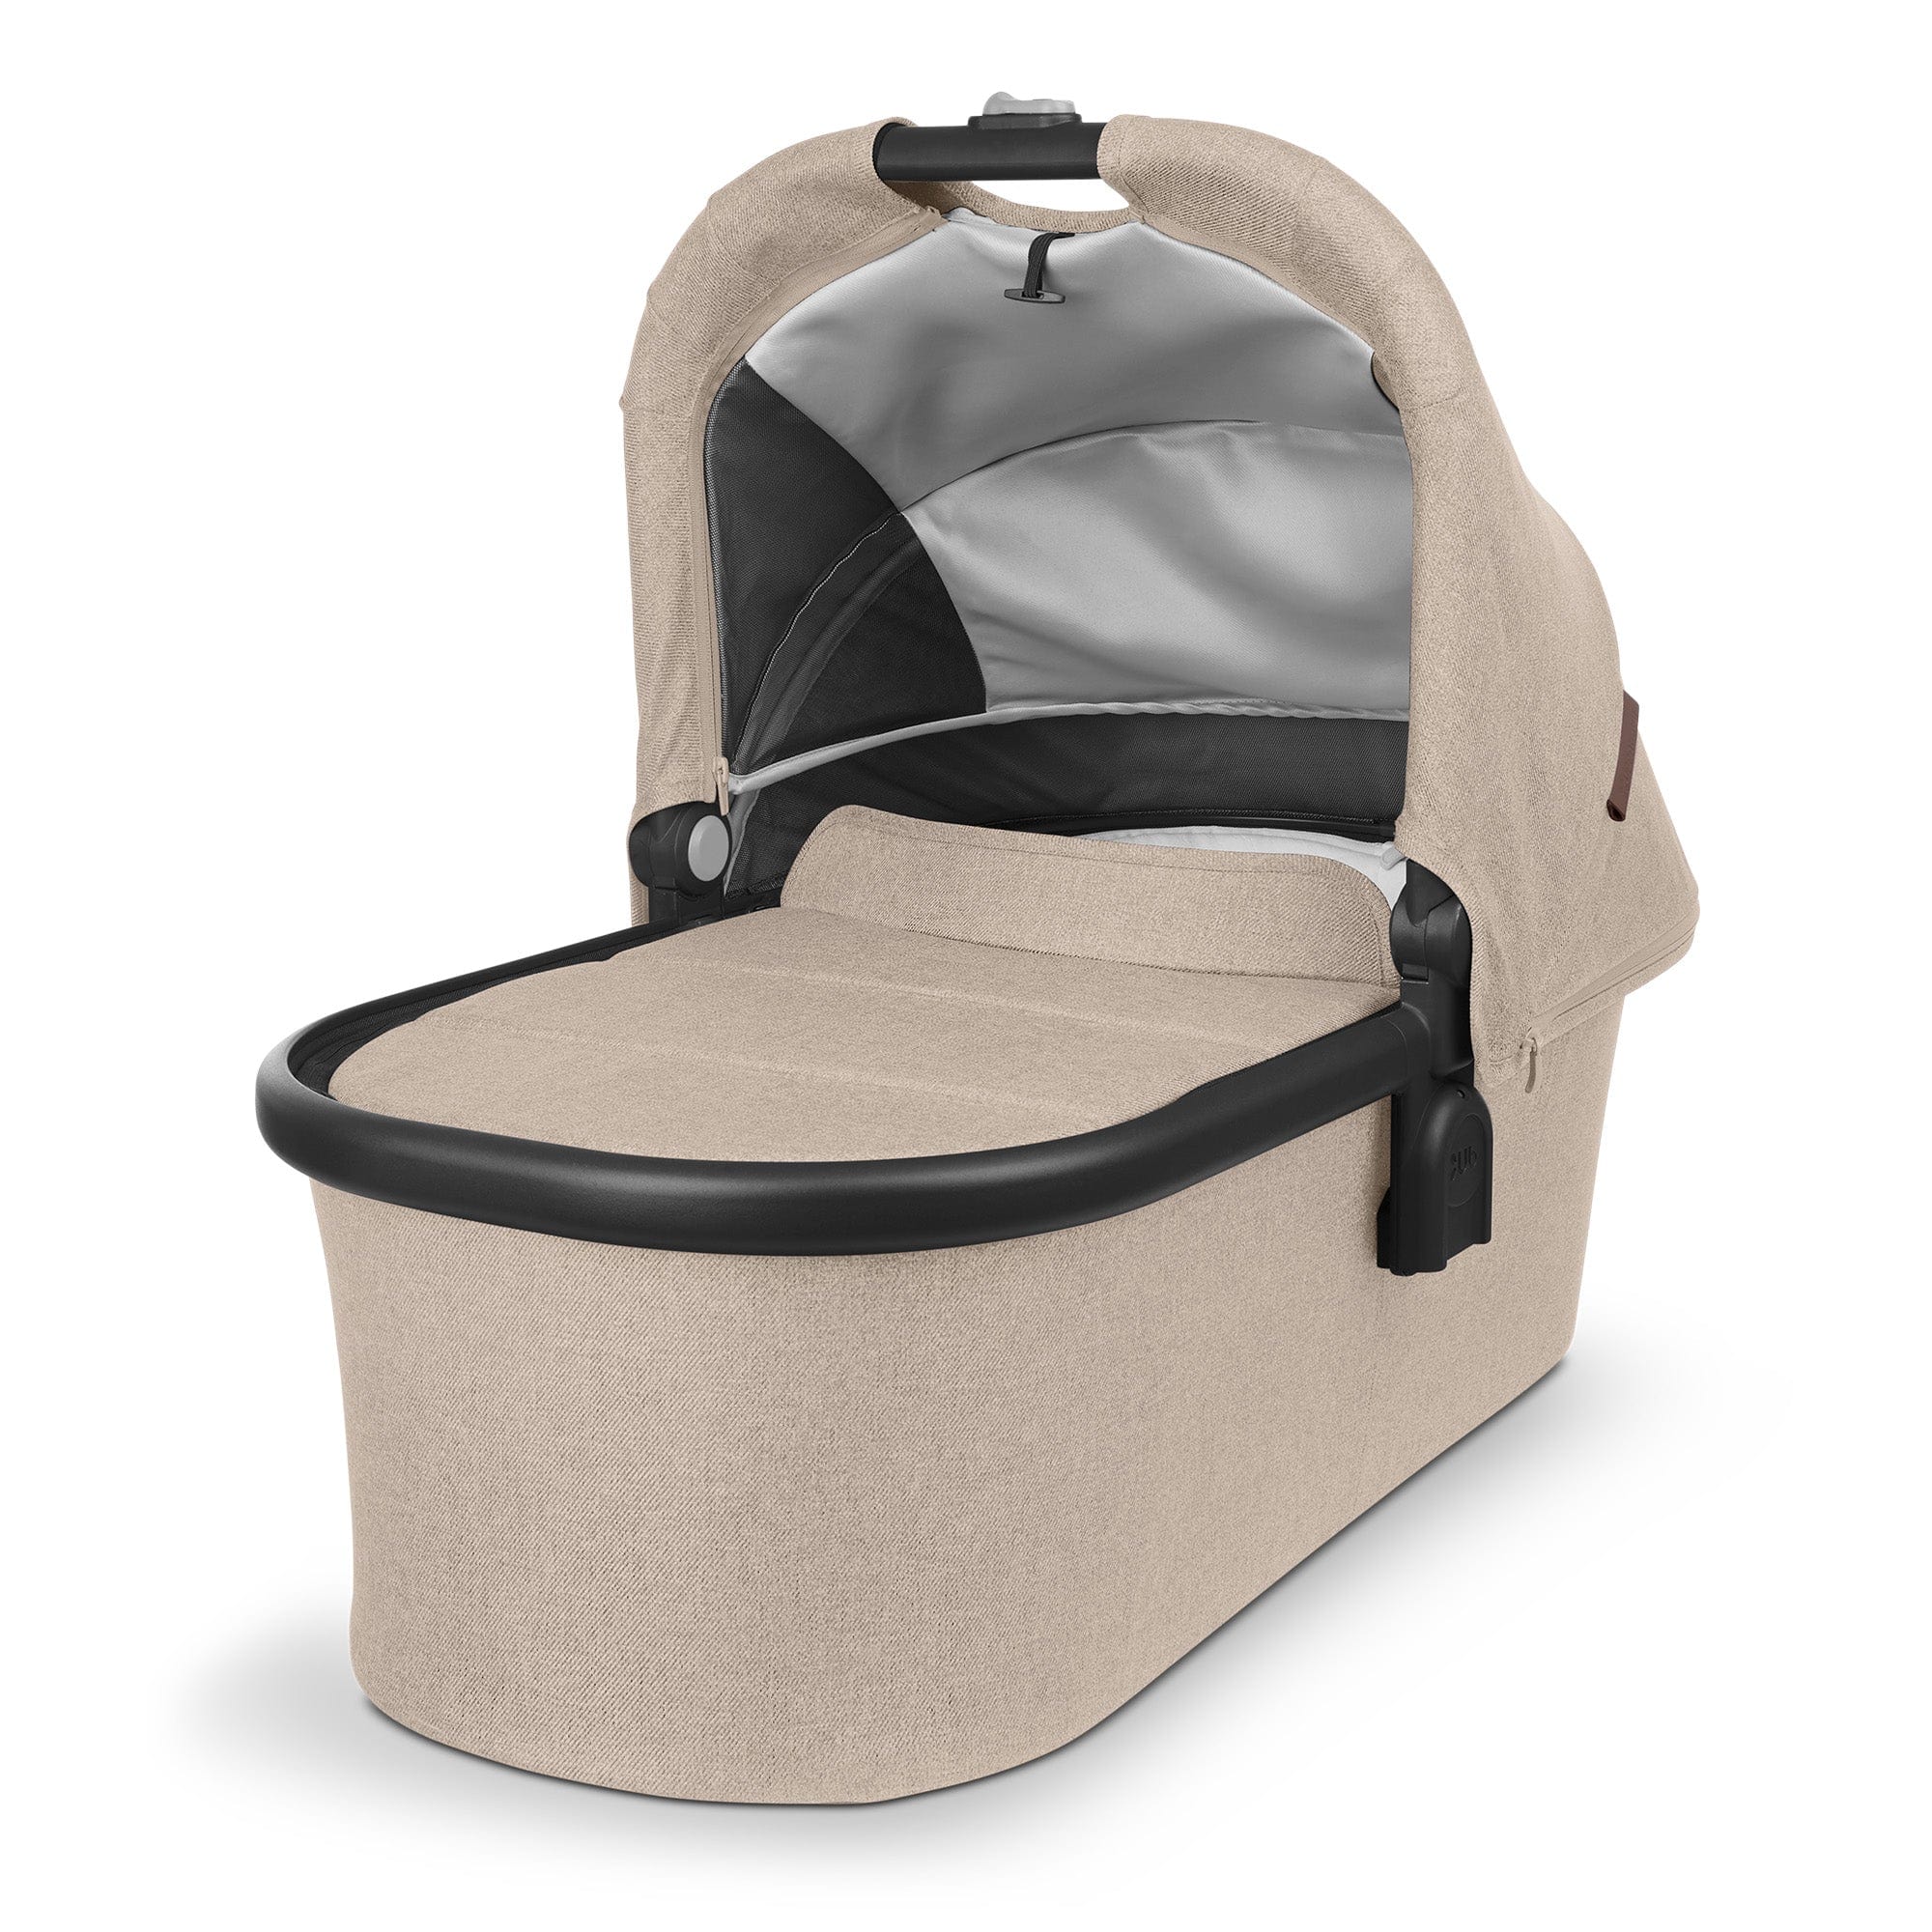 Uppababy travel systems UPPAbaby Cruz v2 Cloud T & Base Travel System - Liam 13985-LIA